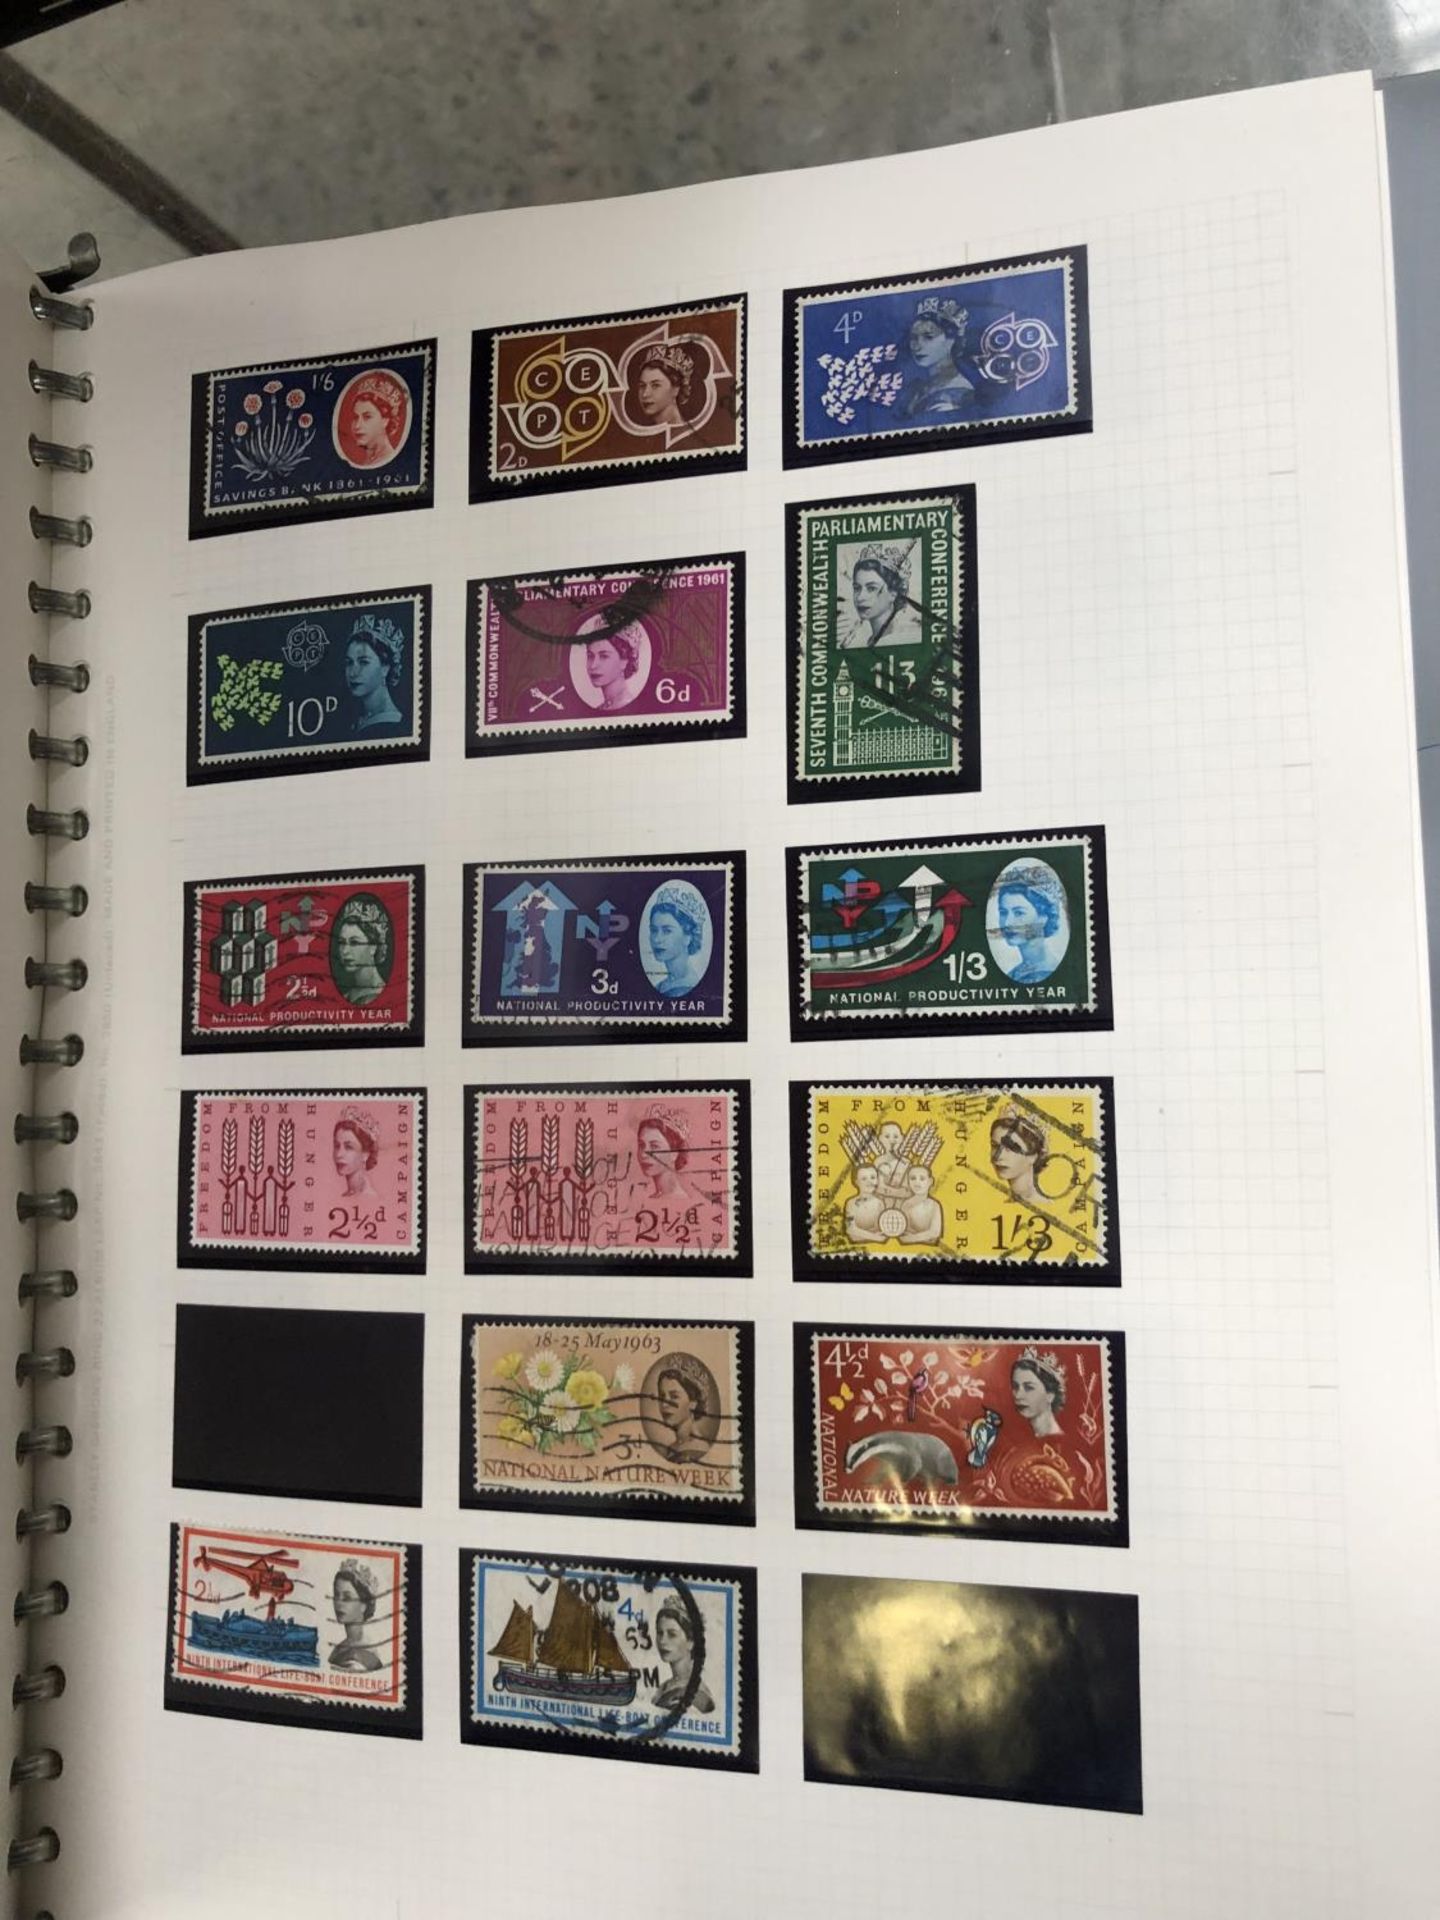 A GREAT BRITAIN STAMP ALBUM, SEE PHOTOS - Image 10 of 10